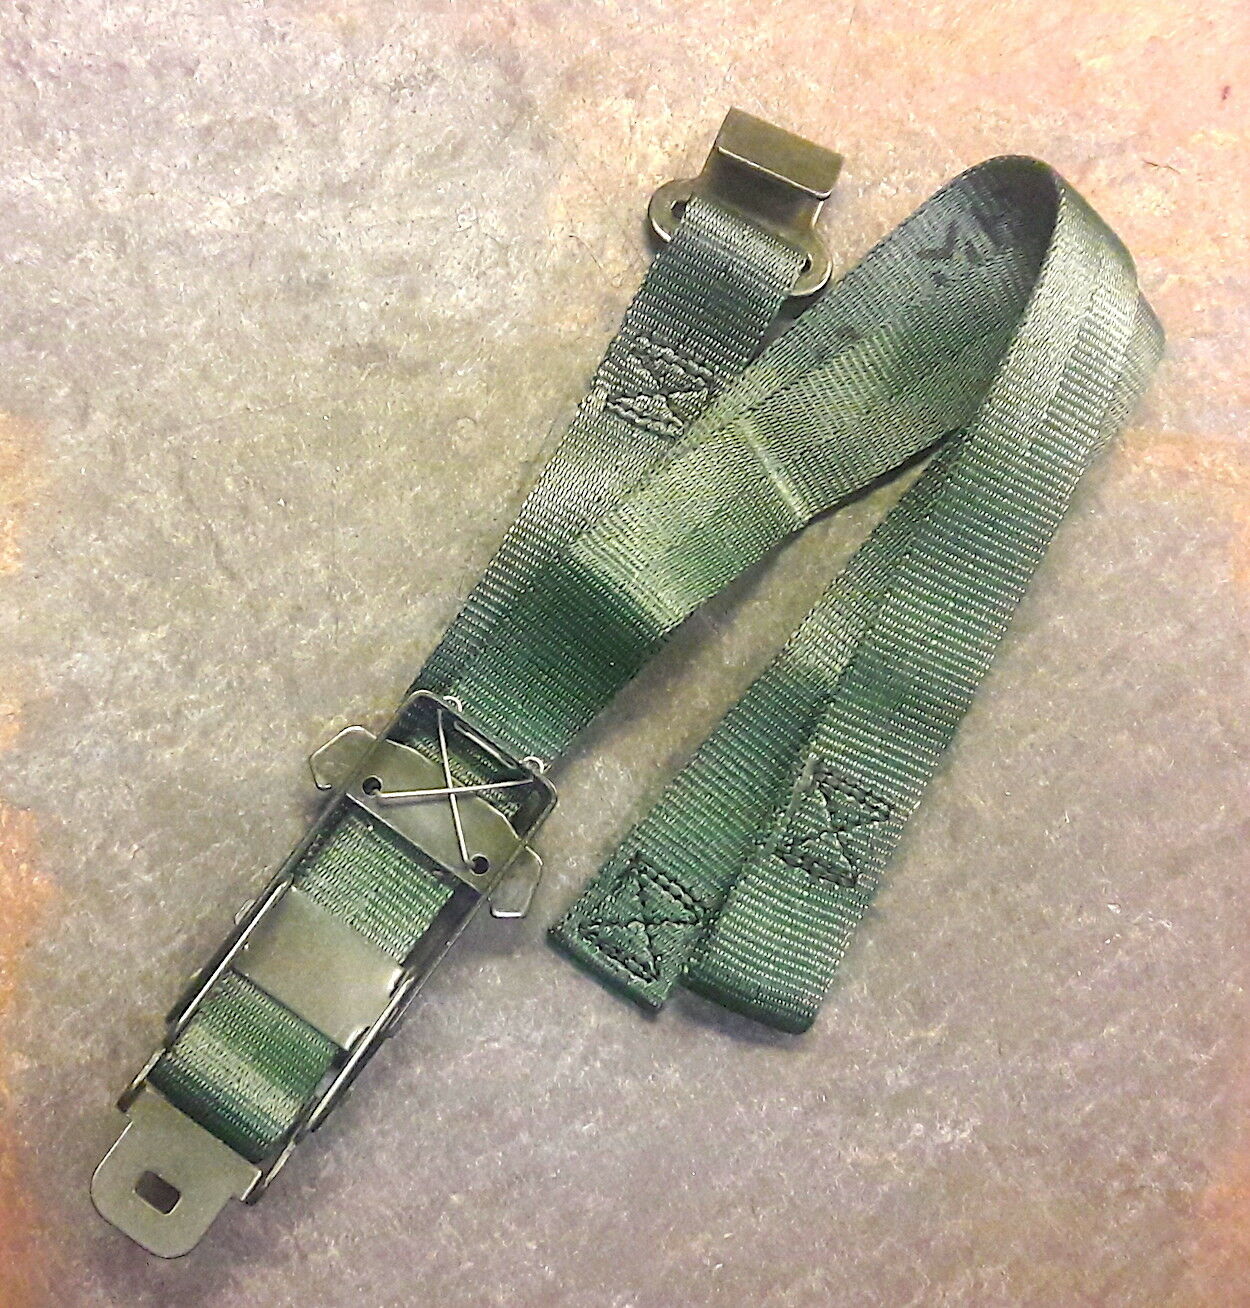 50 each- Hold-Down Strap, Fuel/Water ; Humvee ; 5340012564655 12340488-3 5595992